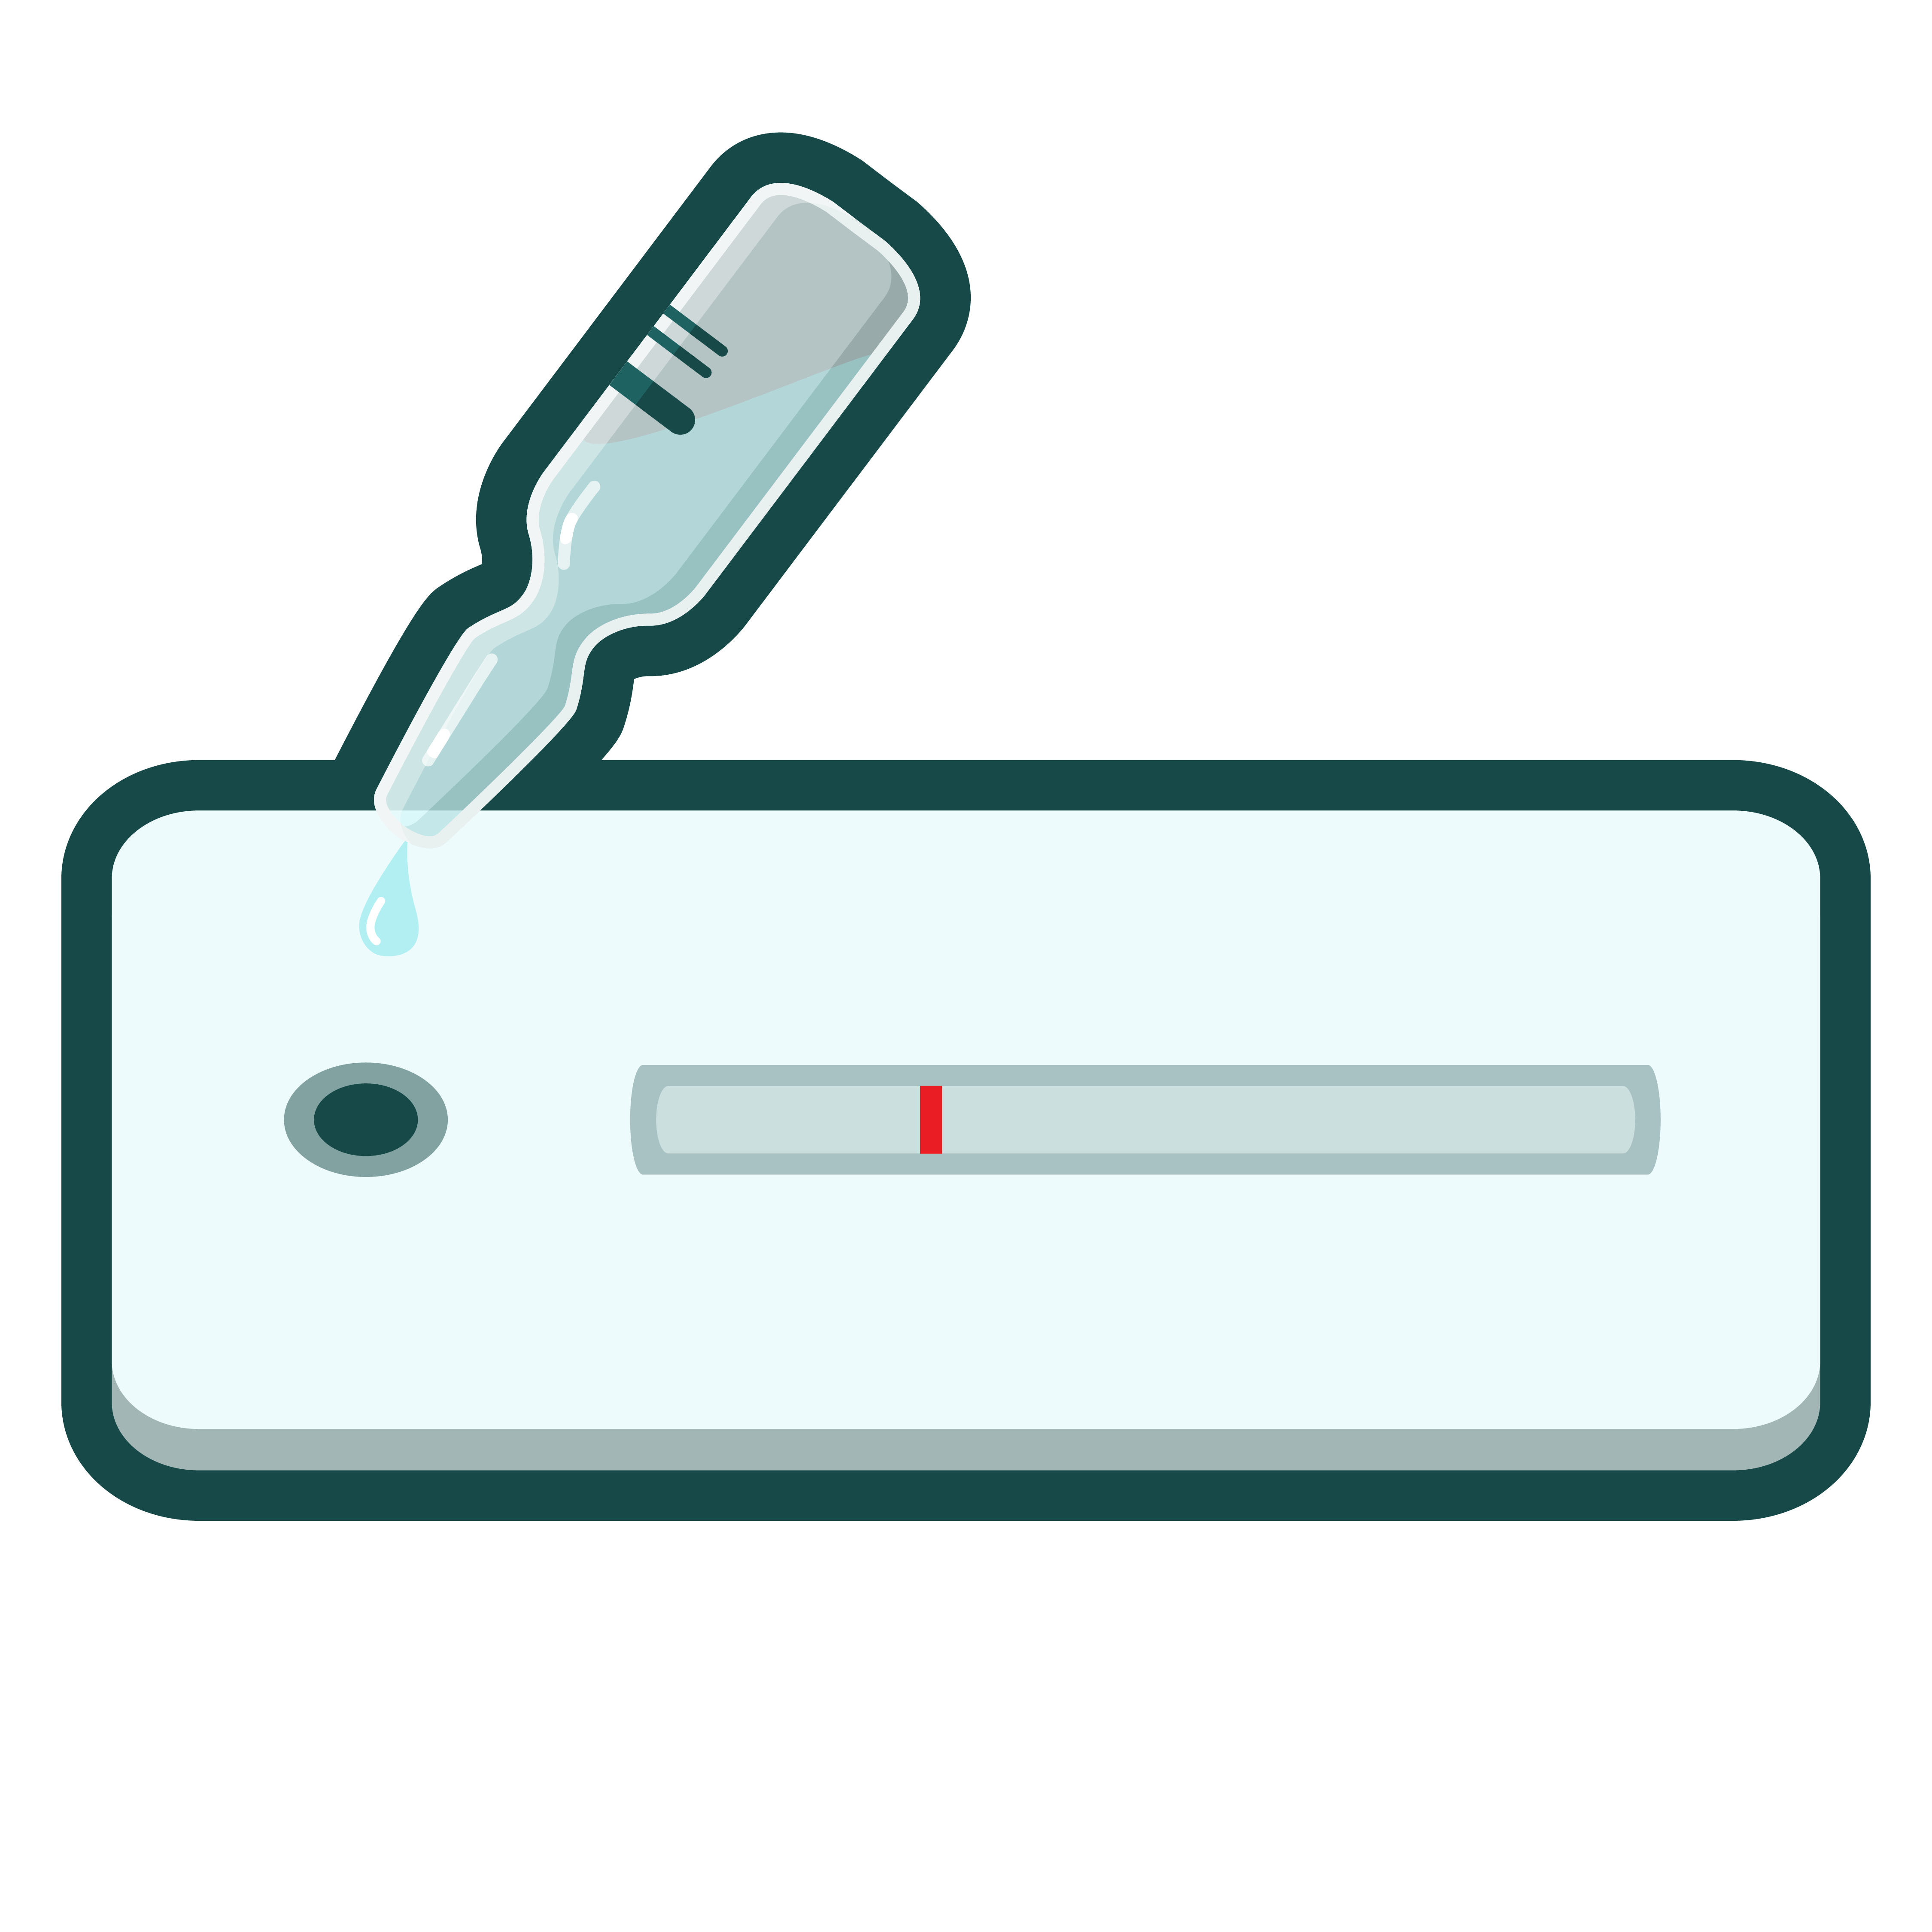 an illustration of a COVID-19 rapid test strip with a bottle dropping liquid into it